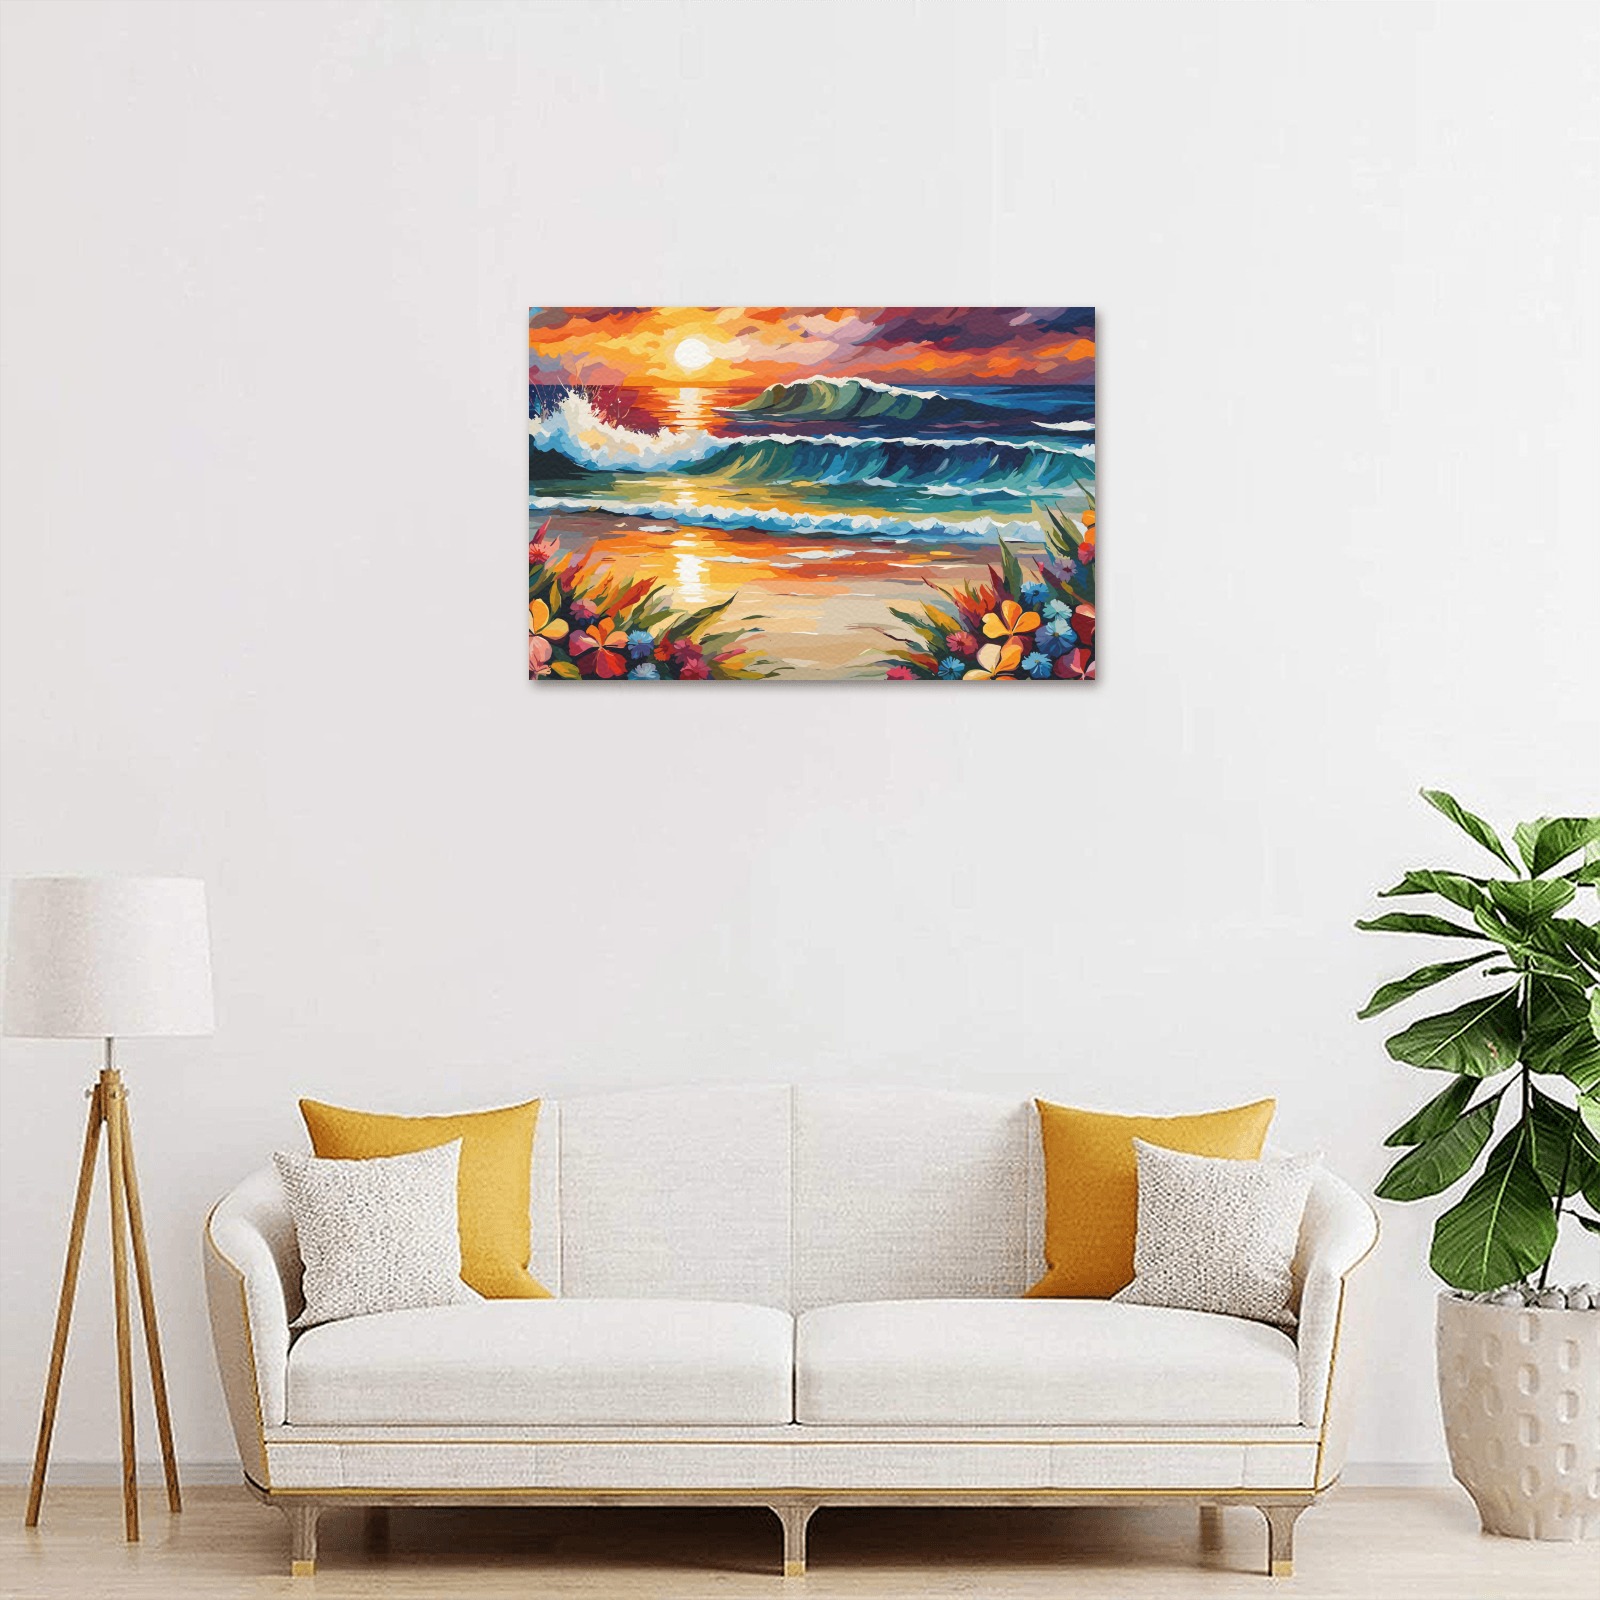 Ocean waves, beach sand, colorful flowers, sunset. Upgraded Canvas Print 18"x12"